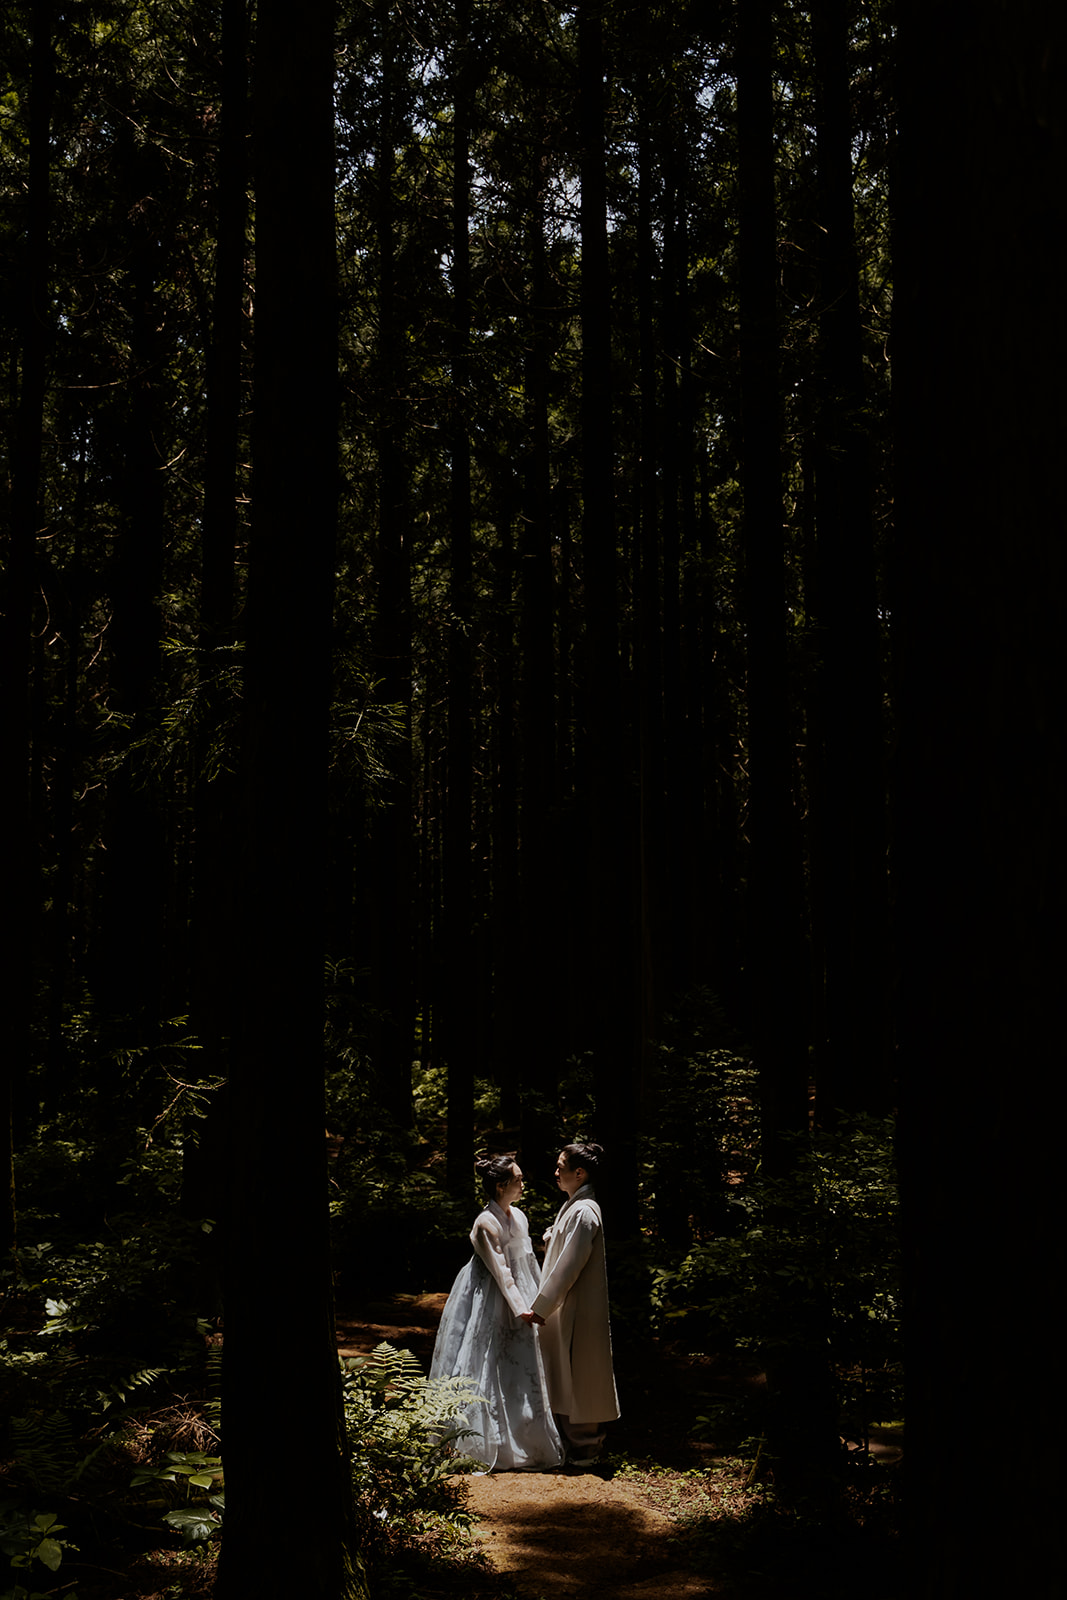 A bride and groom standing in a wooded area in Korea.